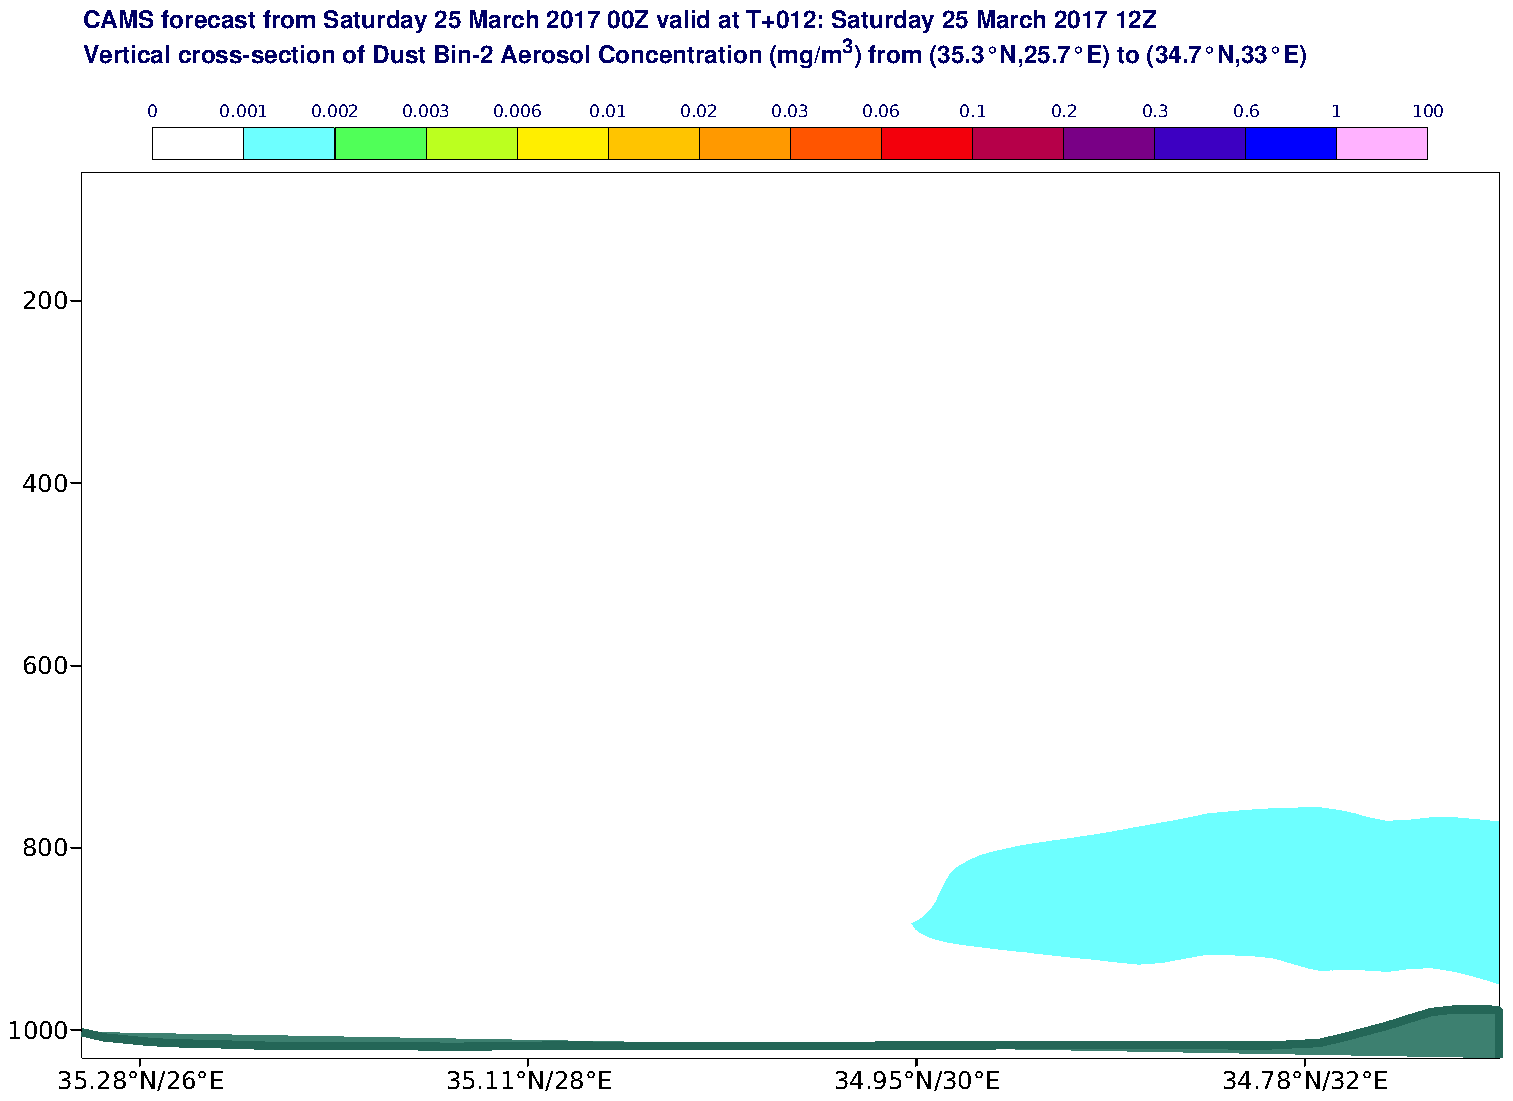 Vertical cross-section of Dust Bin-2 Aerosol Concentration (mg/m3) valid at T12 - 2017-03-25 12:00